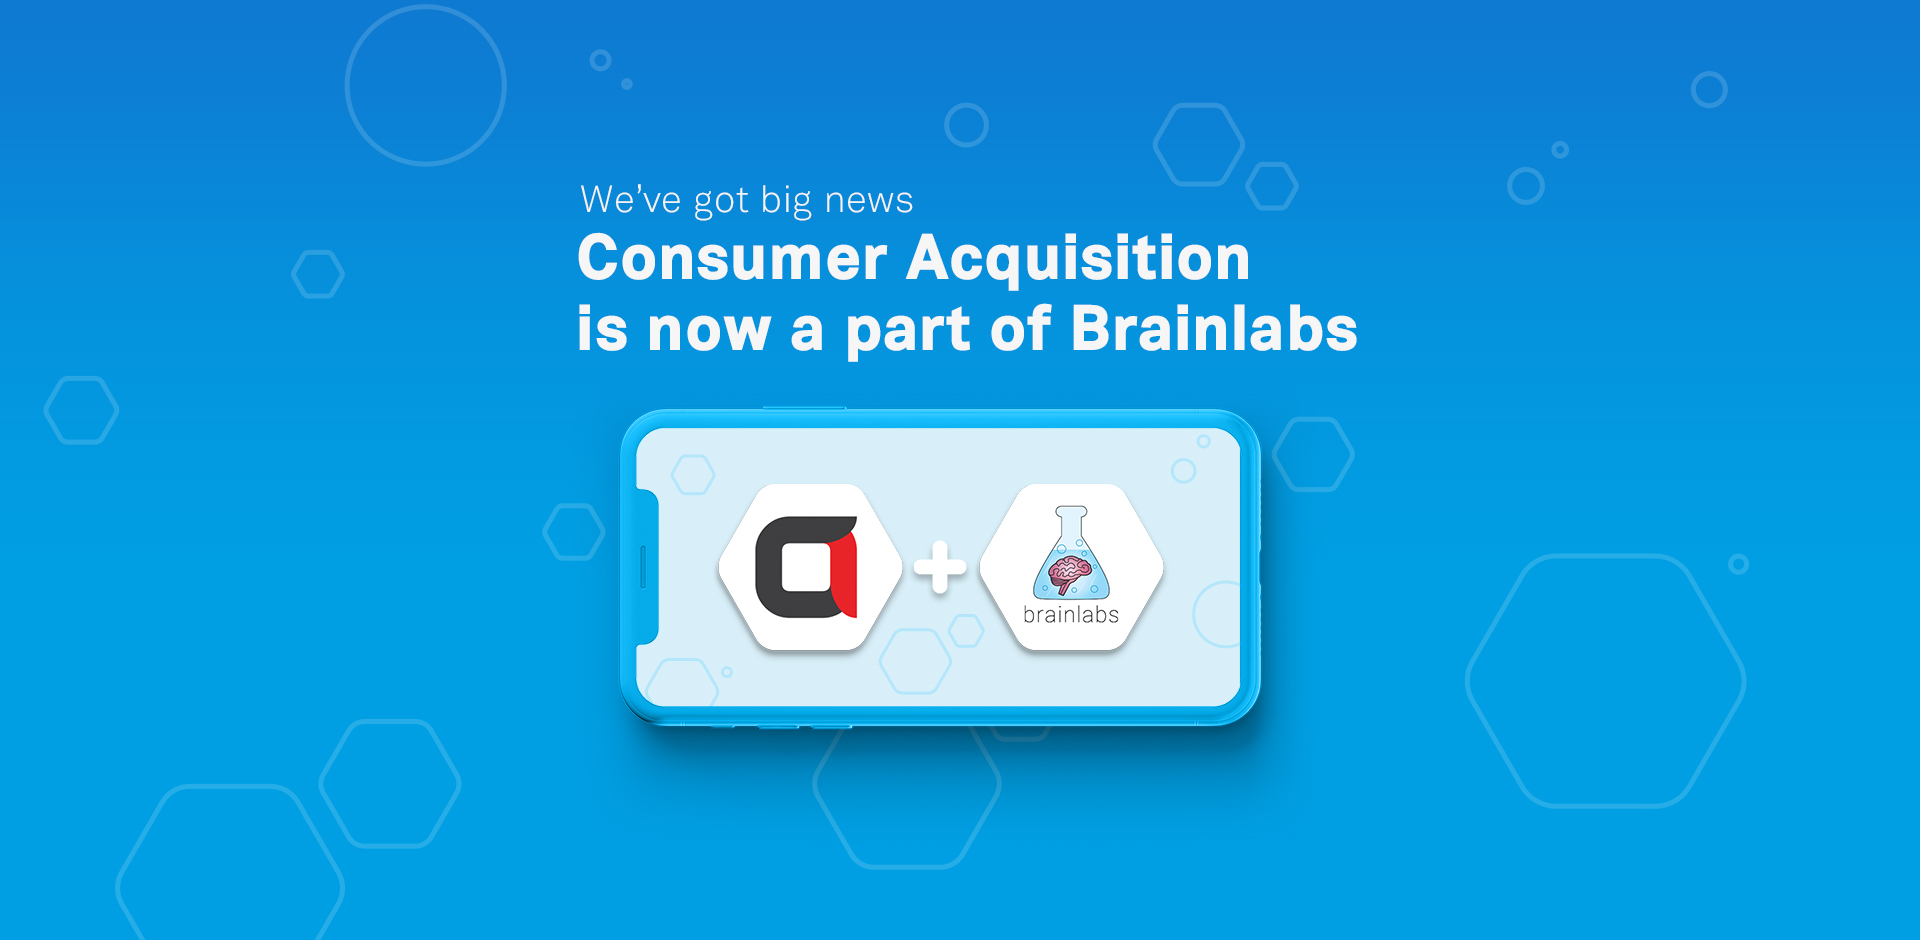 Consumer Acquisition acquired by Brainlabs January 2022